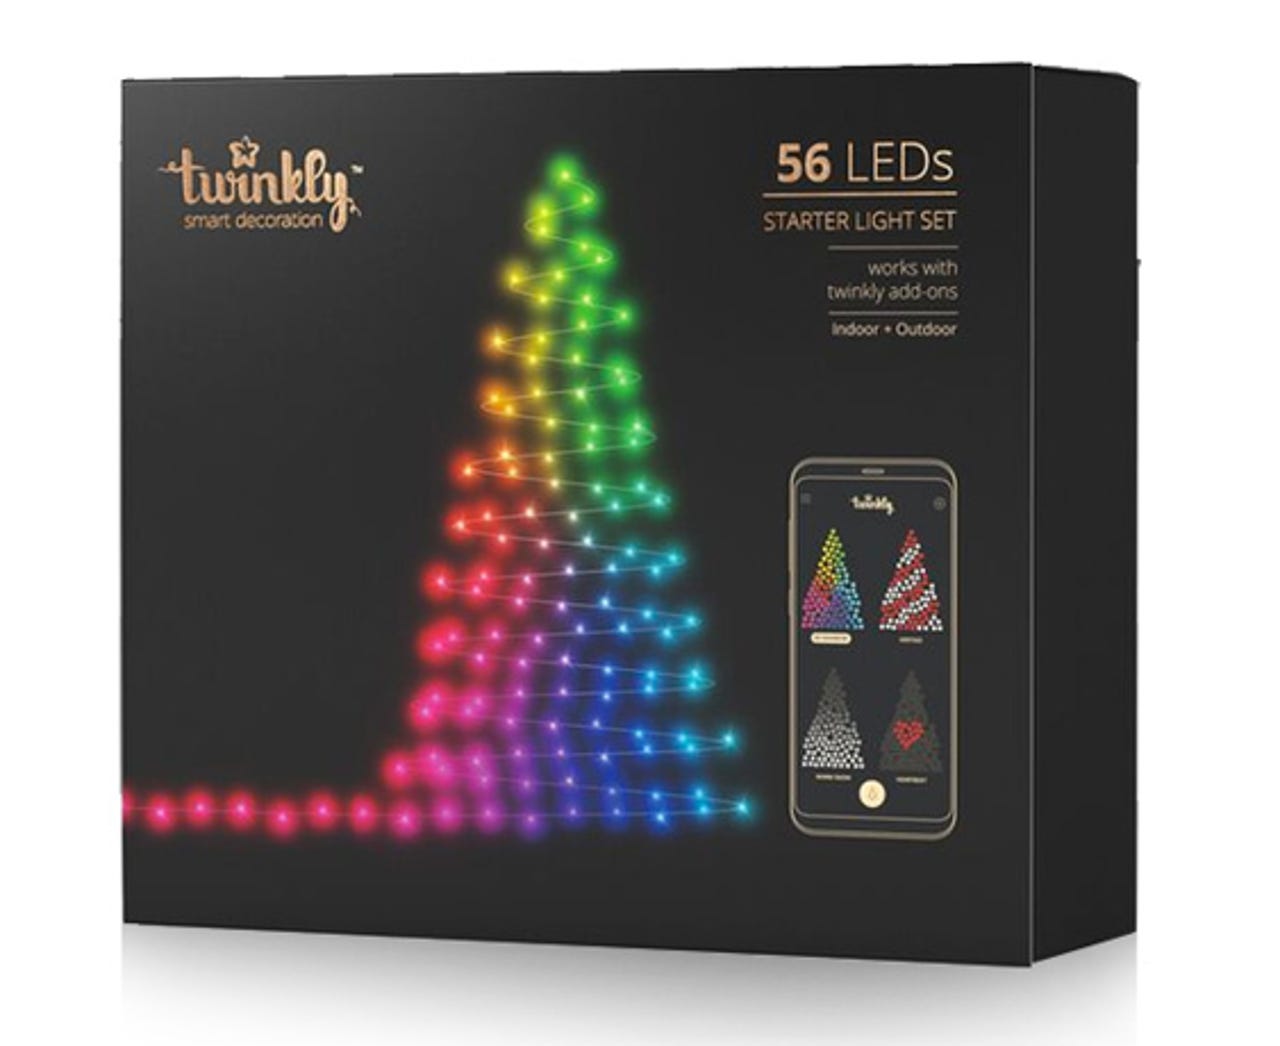 9-twinkly-lights-eileen-brown-zdnet.png